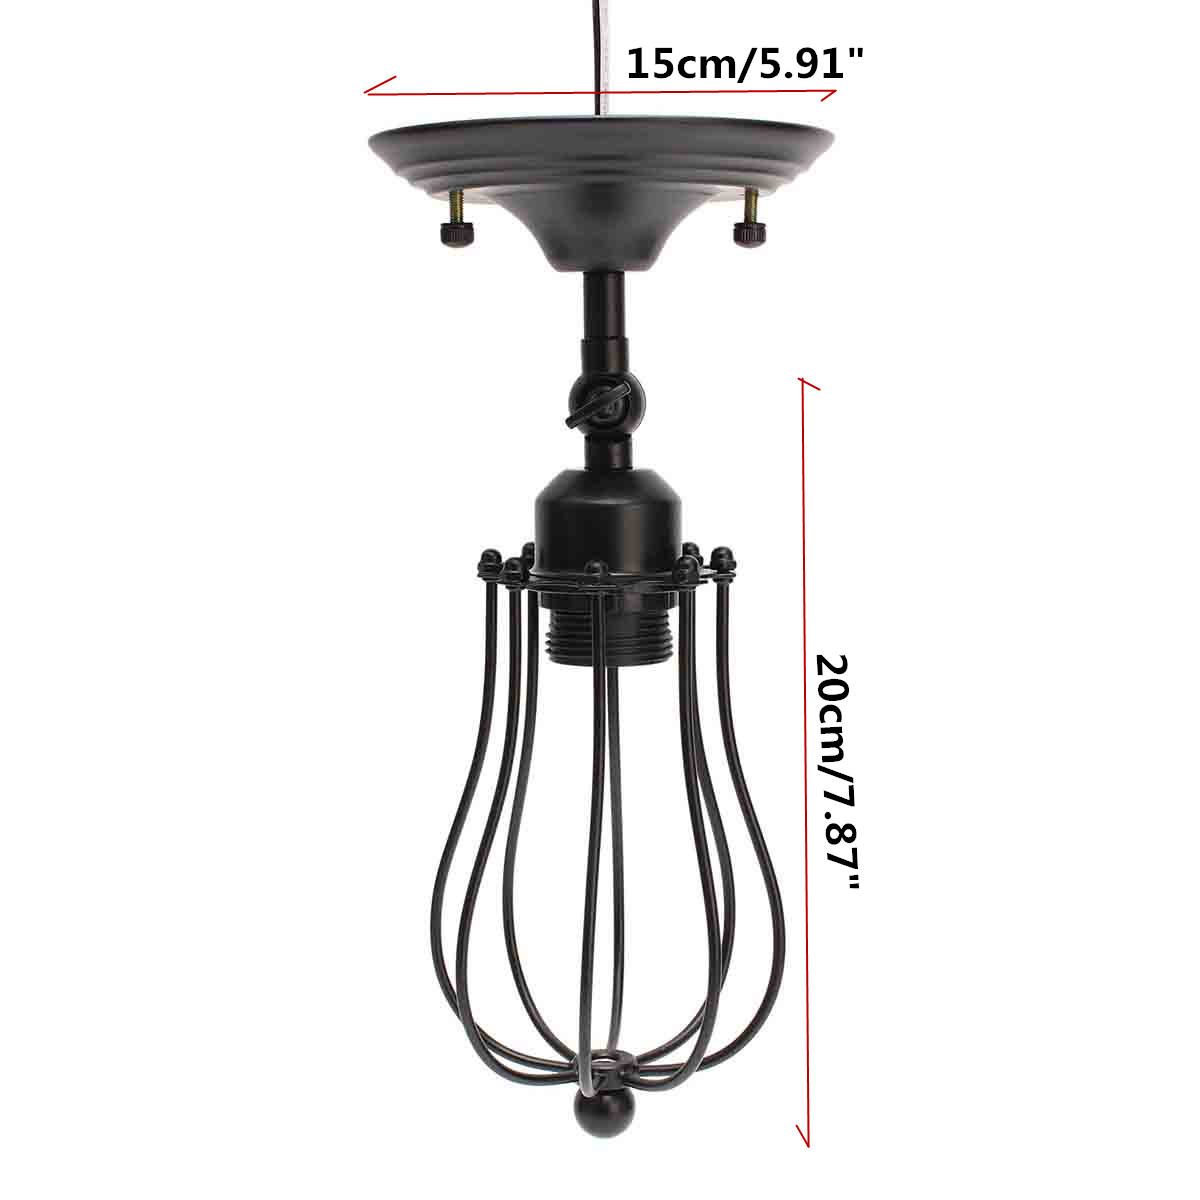 E27-40W-Rustic-Vintage-Wall-Light-Industrial-Style-Iron-Sconce-Lamp-Wired-Cage-Fixture-220V-1154573-3